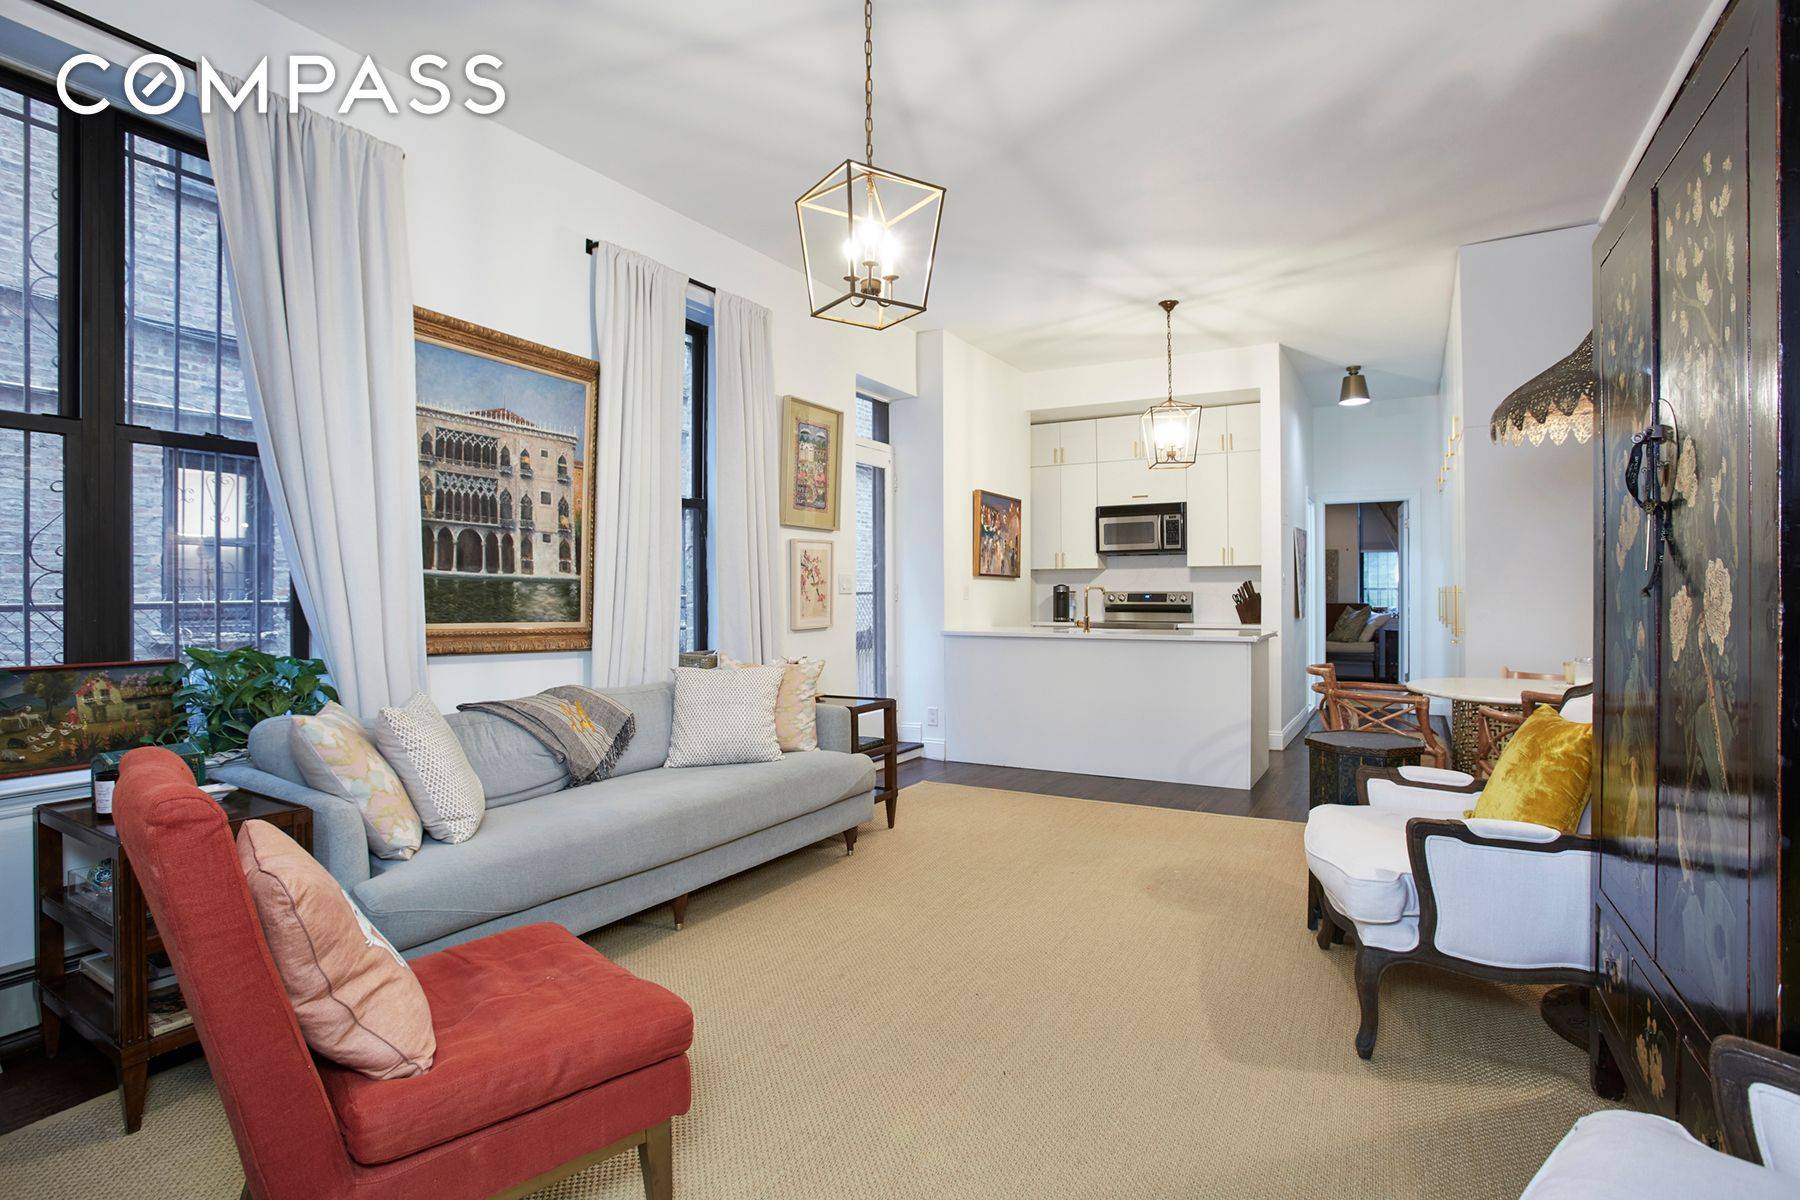 Located on a prime Prospect Heights block, this duplex two bedroom.